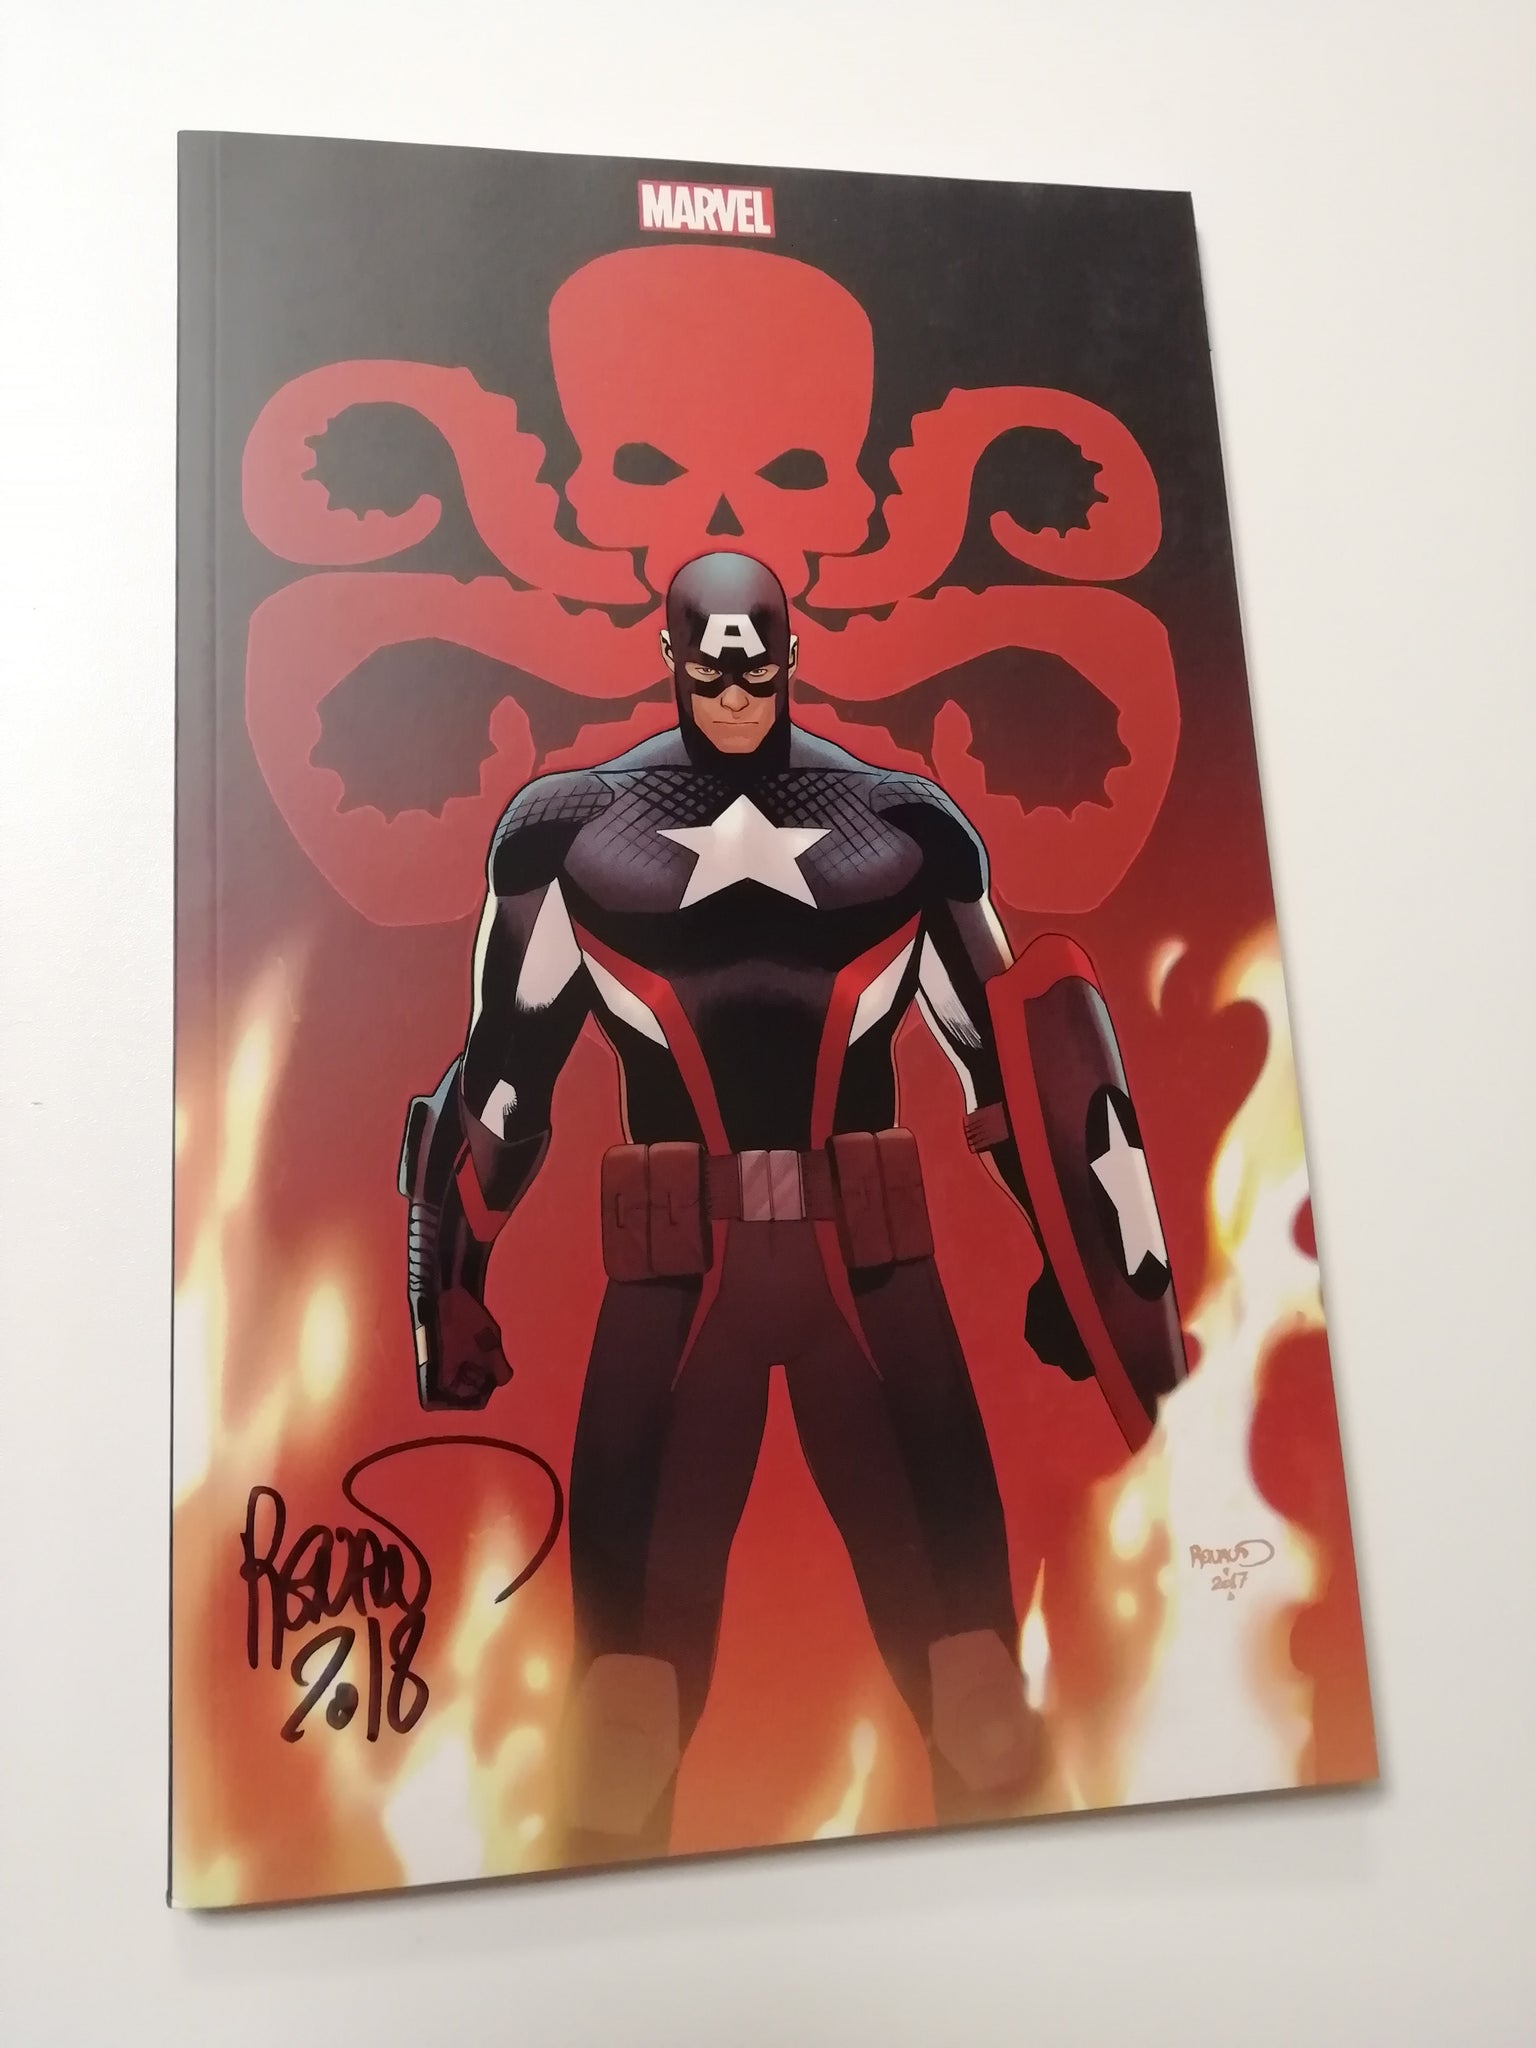 Secret Empire #1 NM+ Panini France Edition Collector 1/300 Paul Renaud Signed